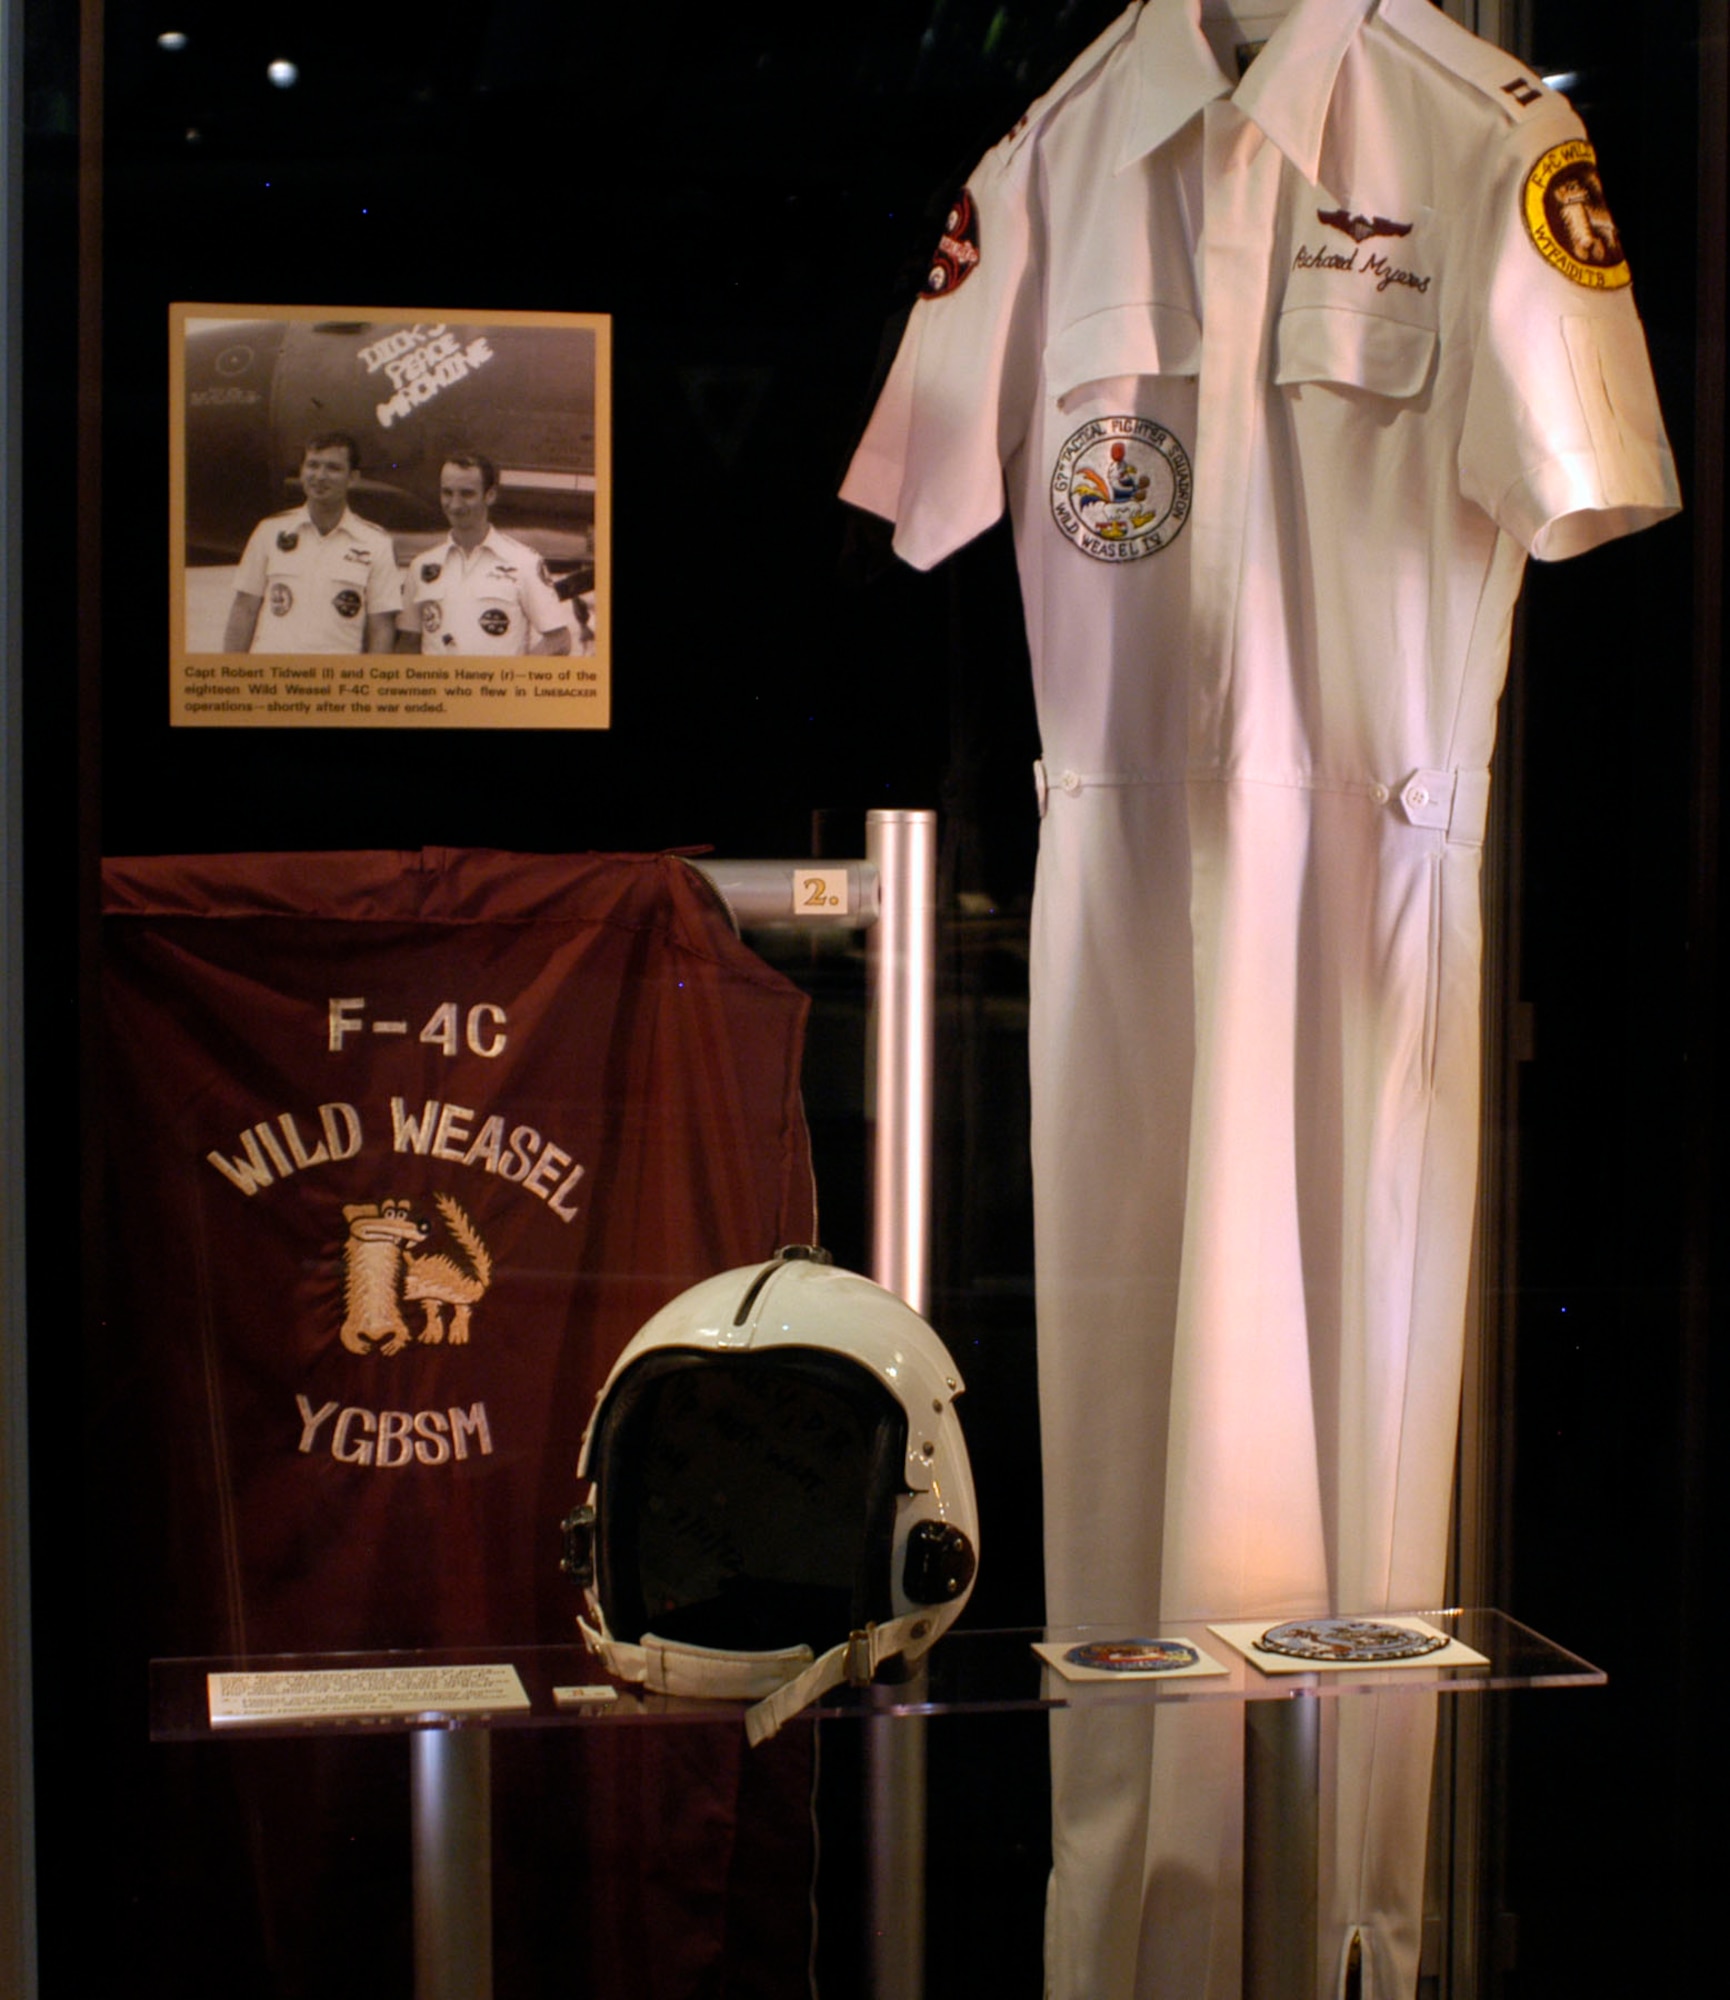 DAYTON, Ohio - Capt. Richard Myers' Wild Weasel IV party suit. Capt. Myers was an F-4C pilot who flew Linebacker missions over North Vietnam. Myers later rose to the rank of four star general, and from 2001-2005 was the Chairman of the Joint Chiefs of Staff. Also in the exhibit case is a helmet worn by Capt. Dennis Haney during Linebacker operations. On combat missions, the helmet had a camouflaged cover. And, Capt. Haney's travel bag. (U.S. Air Force photo)